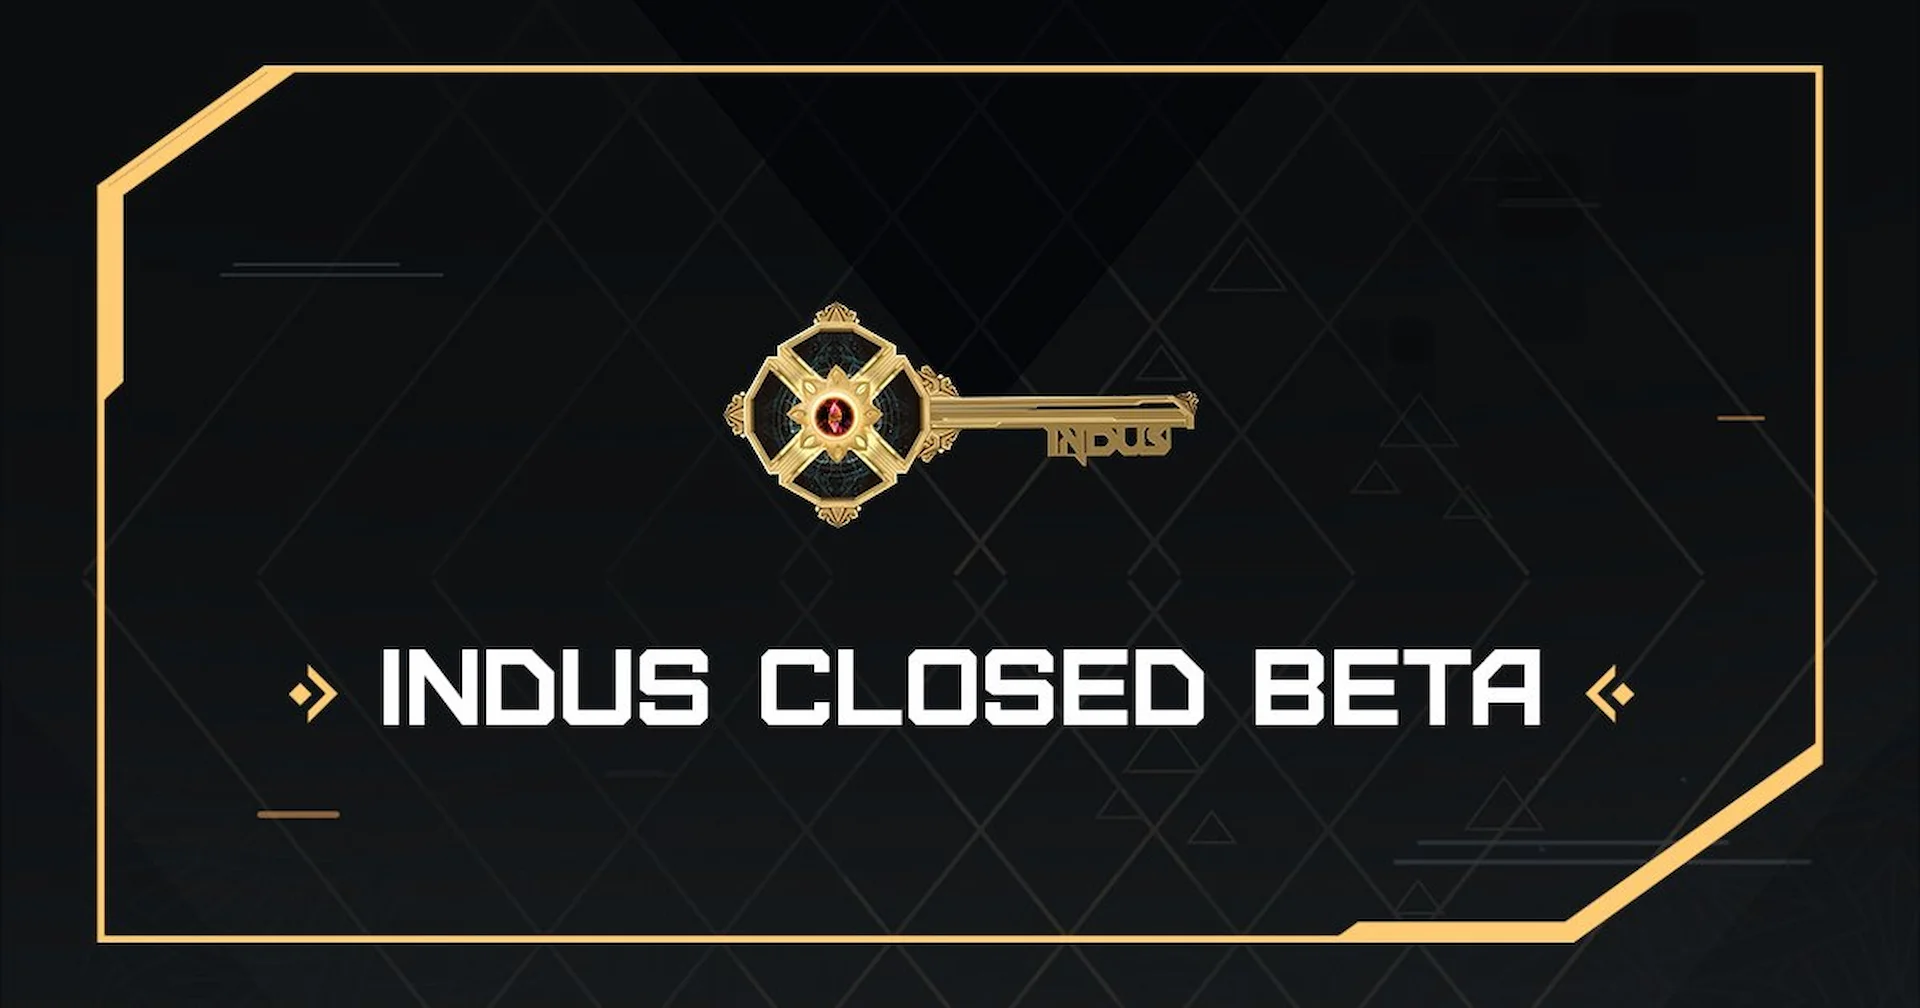 SuperGaming Launches Official Website for Indus Closed Beta